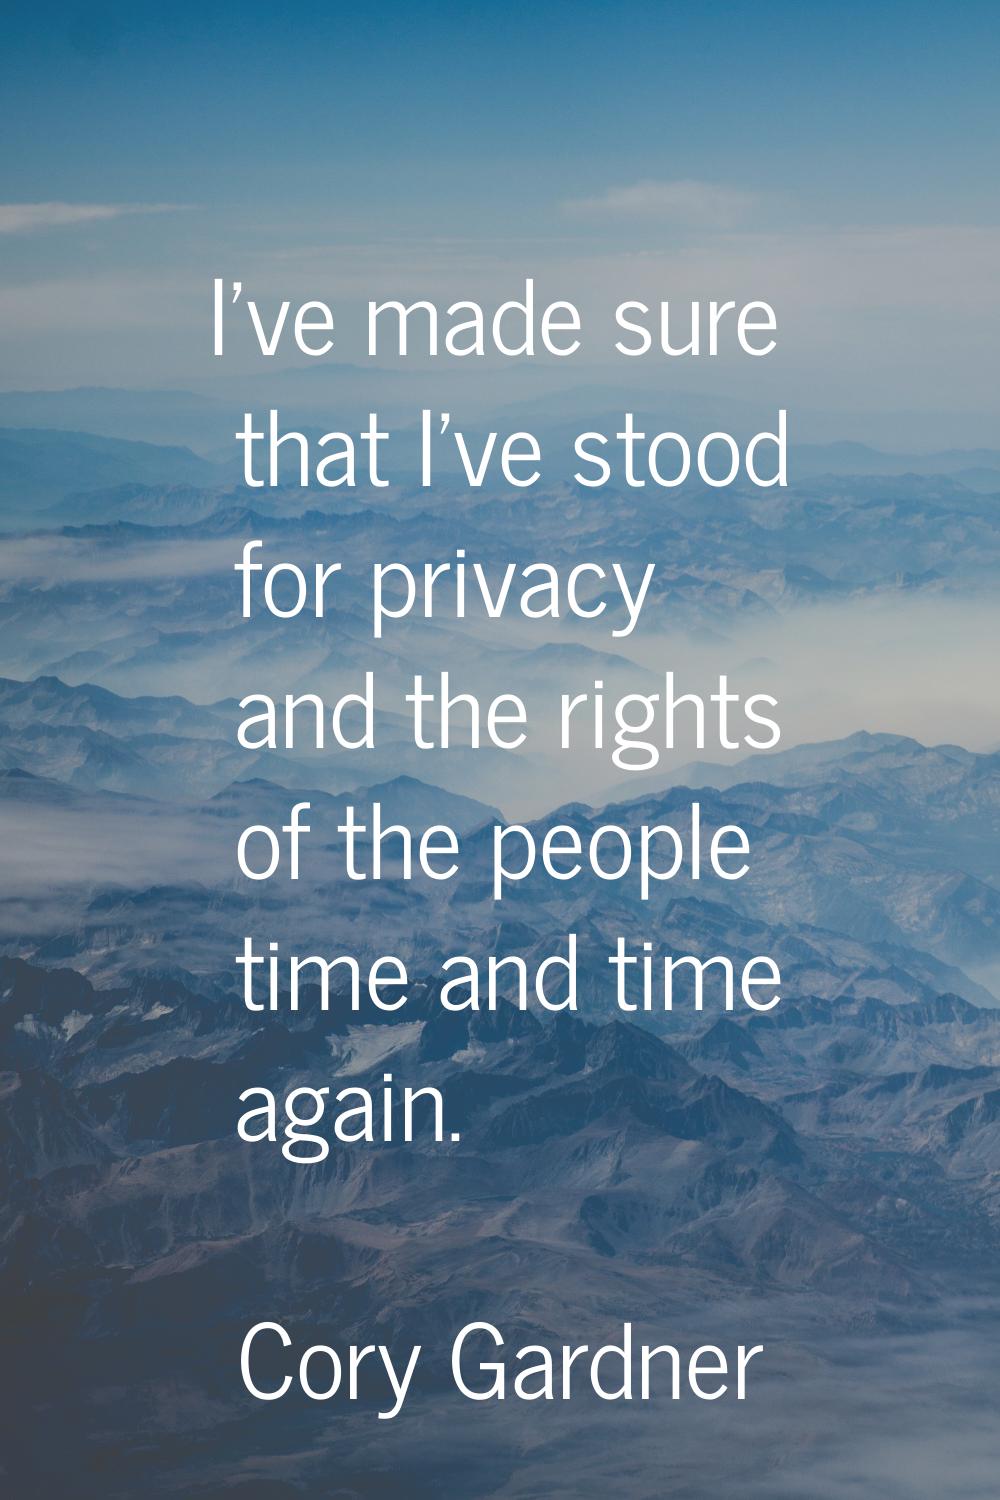 I've made sure that I've stood for privacy and the rights of the people time and time again.